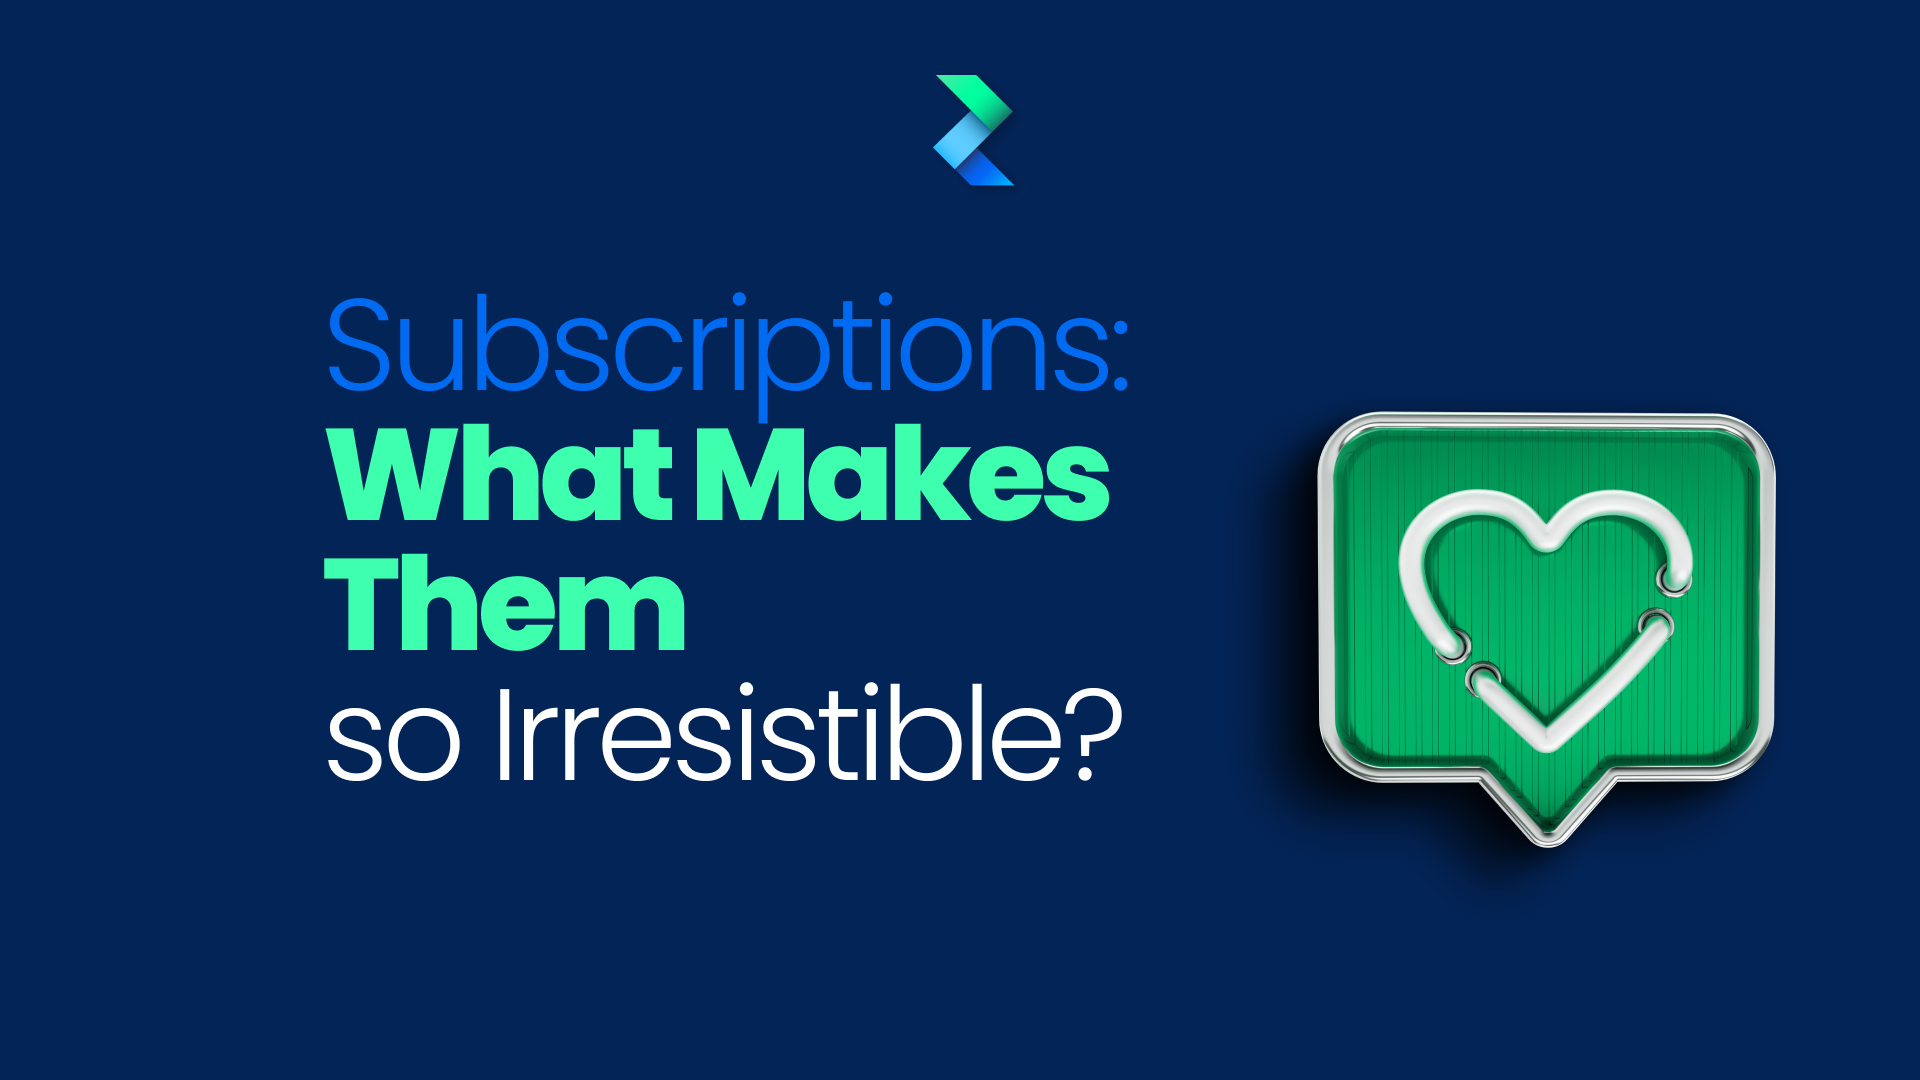 Subscriptions: What makes them so irresistible?